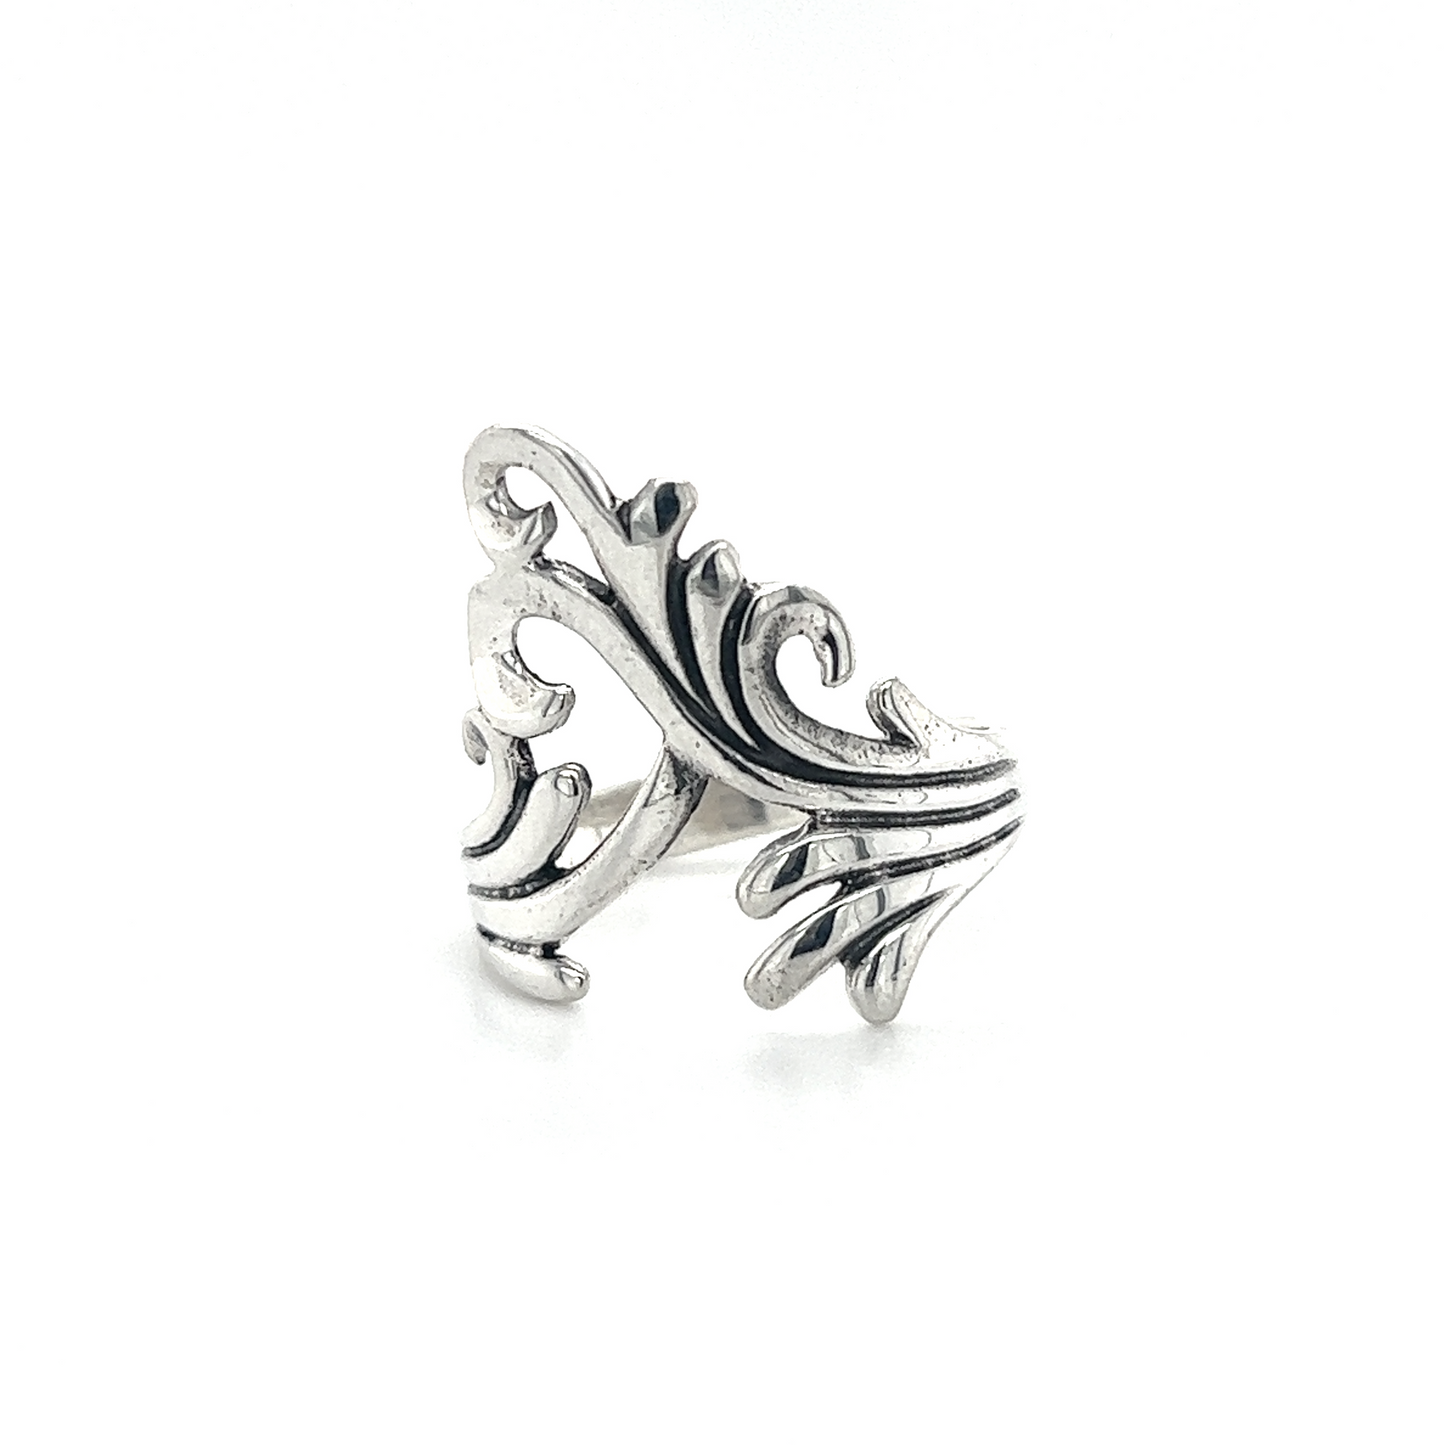 A Statement Freeform Ring by Super Silver, with an ornate design, exuding elegance and unique shape.